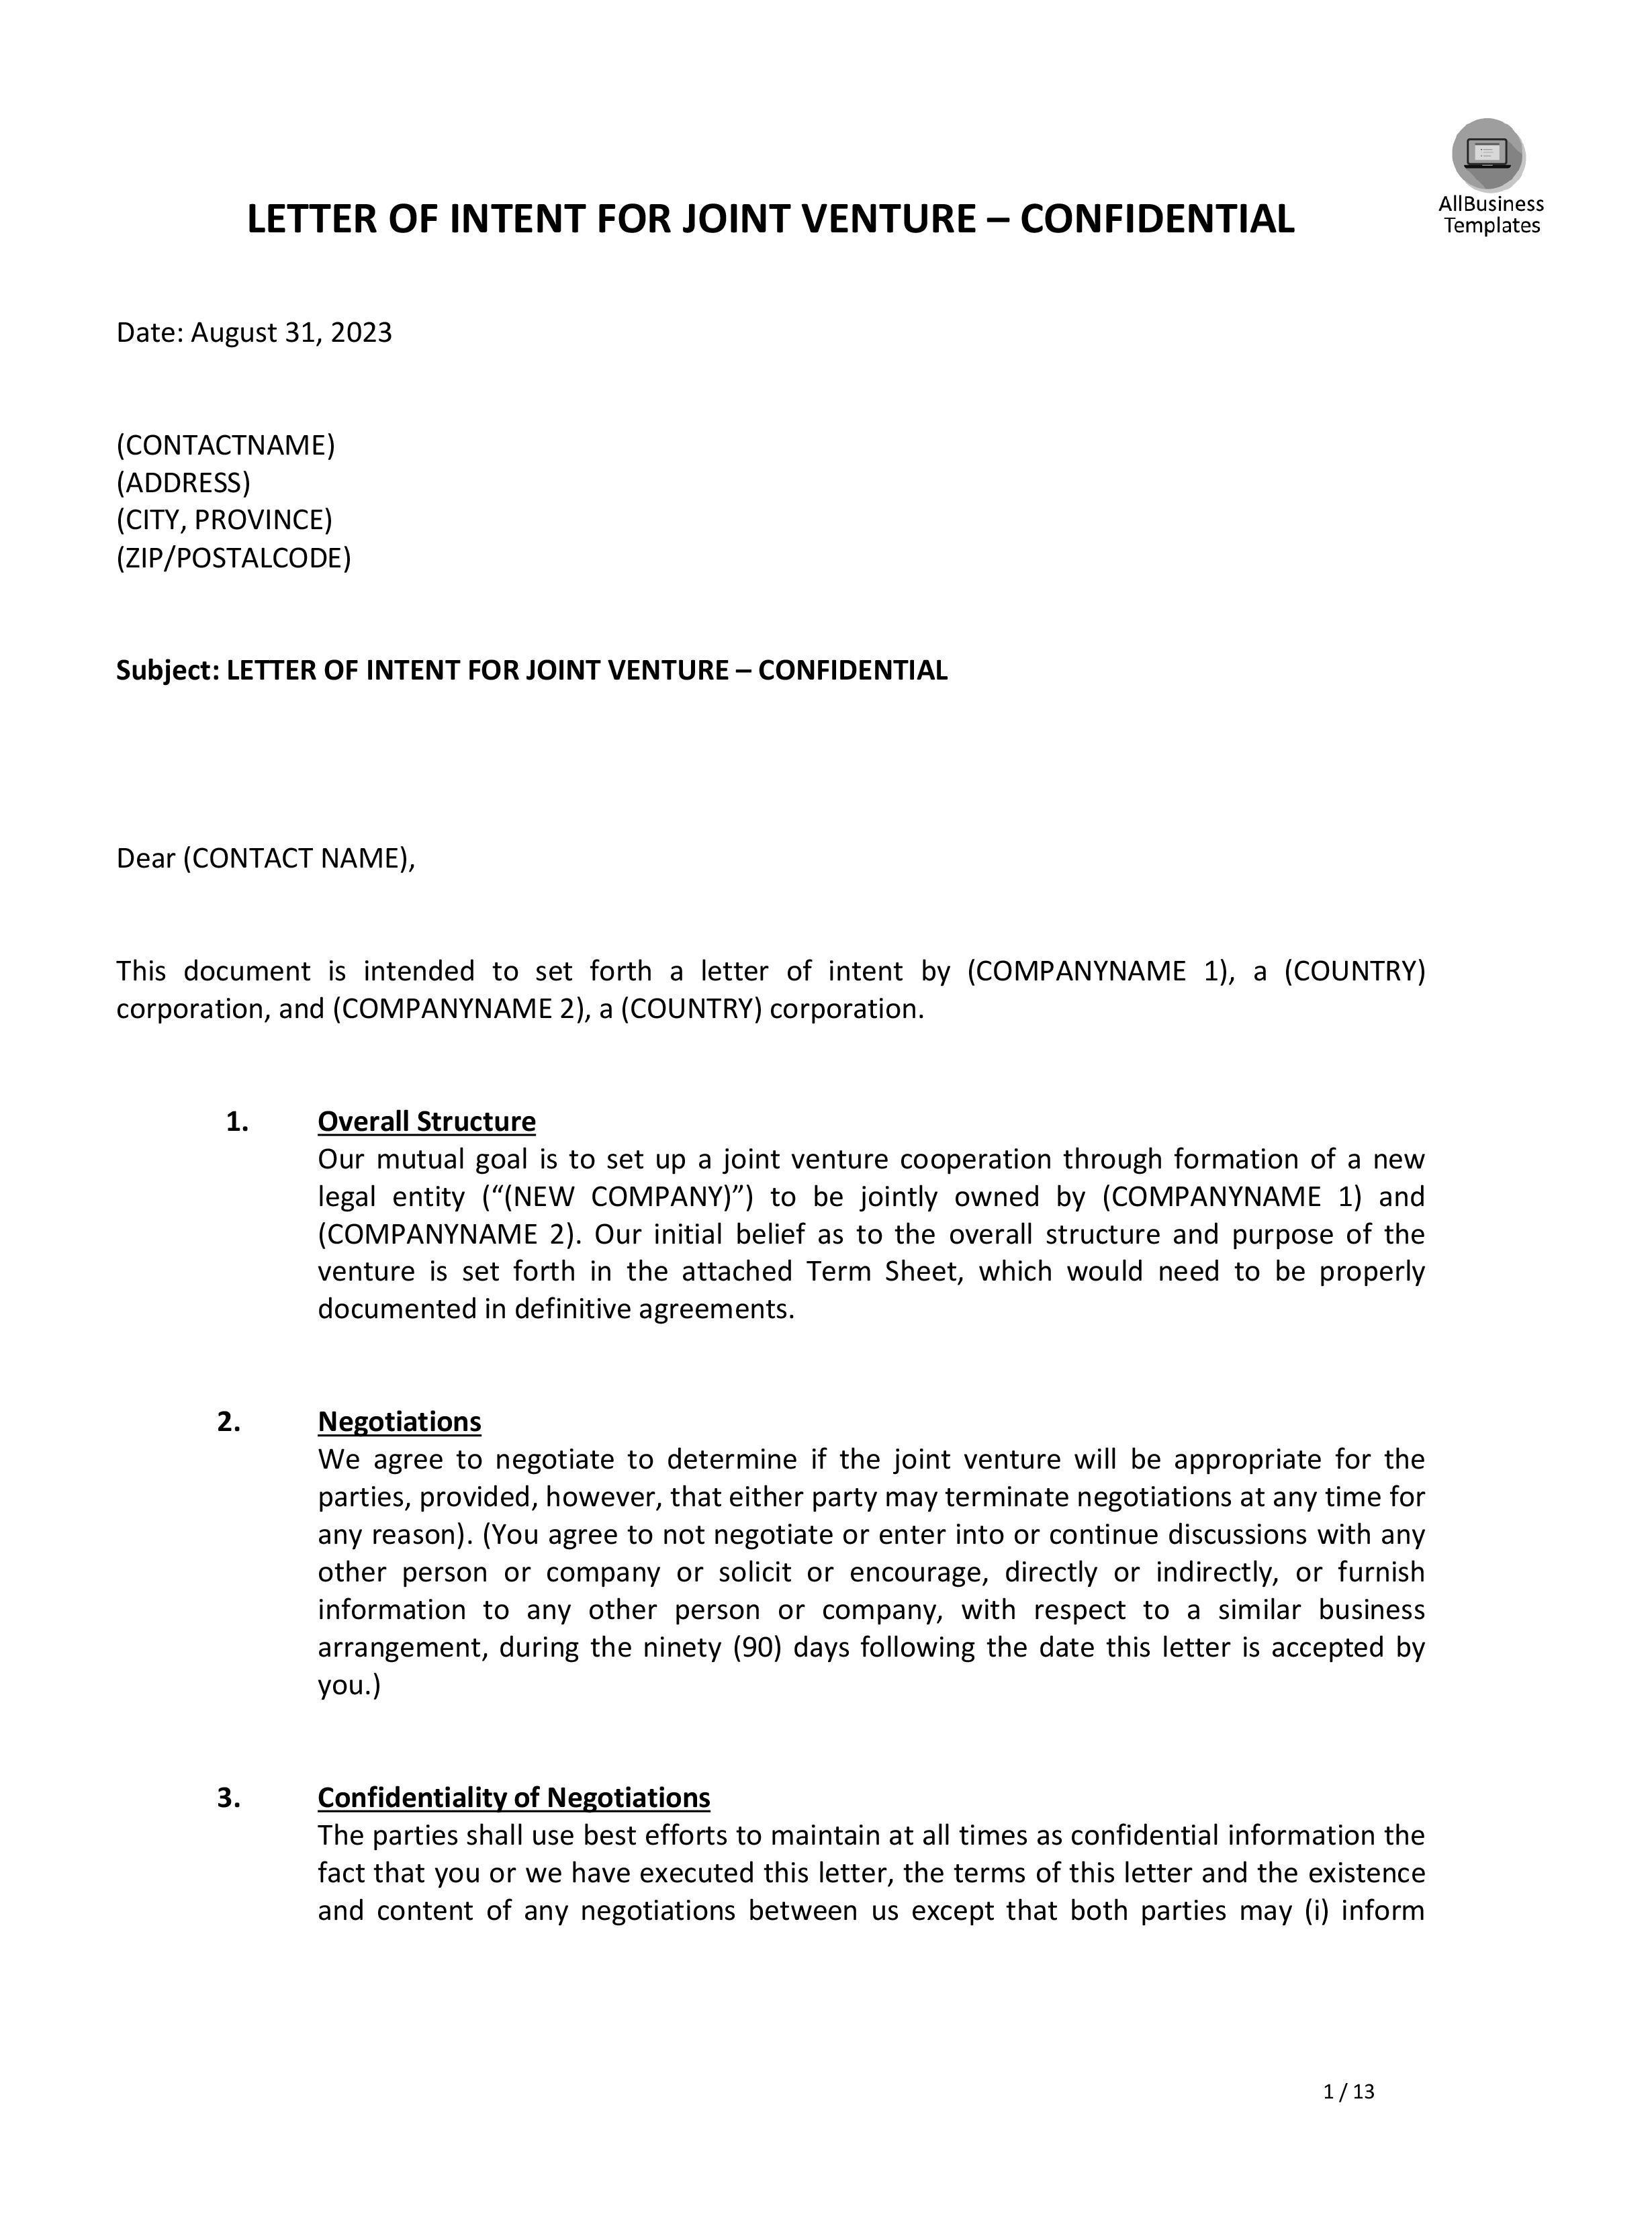 Joint Venture Letter Of Intent Template main image